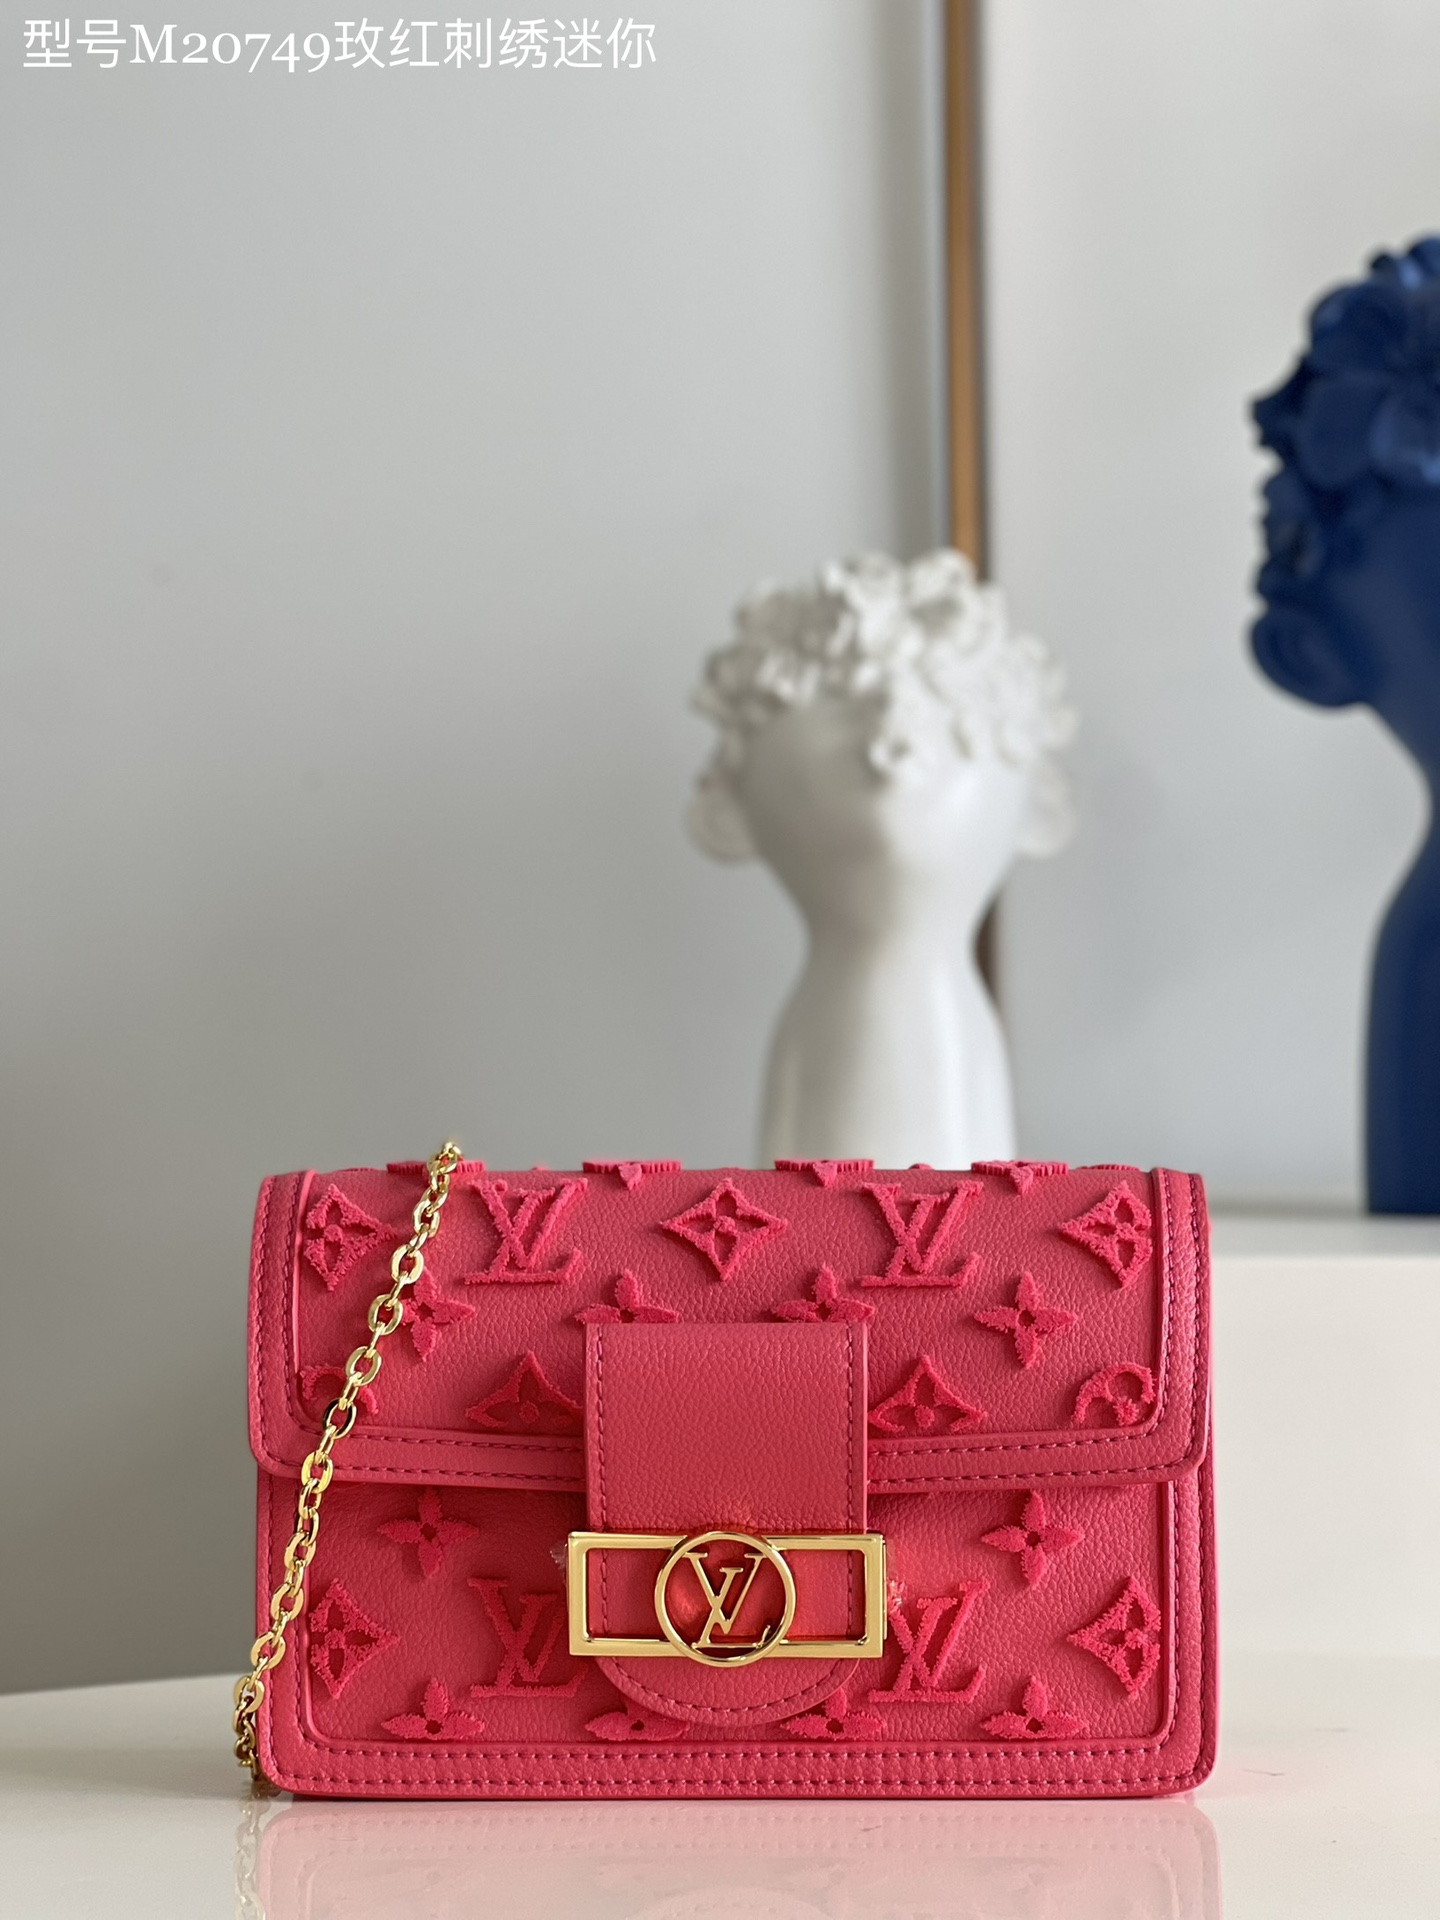 Louis Vuitton LV Dauphine Bags Handbags Red Rose Embroidery Cowhide Mini M20749